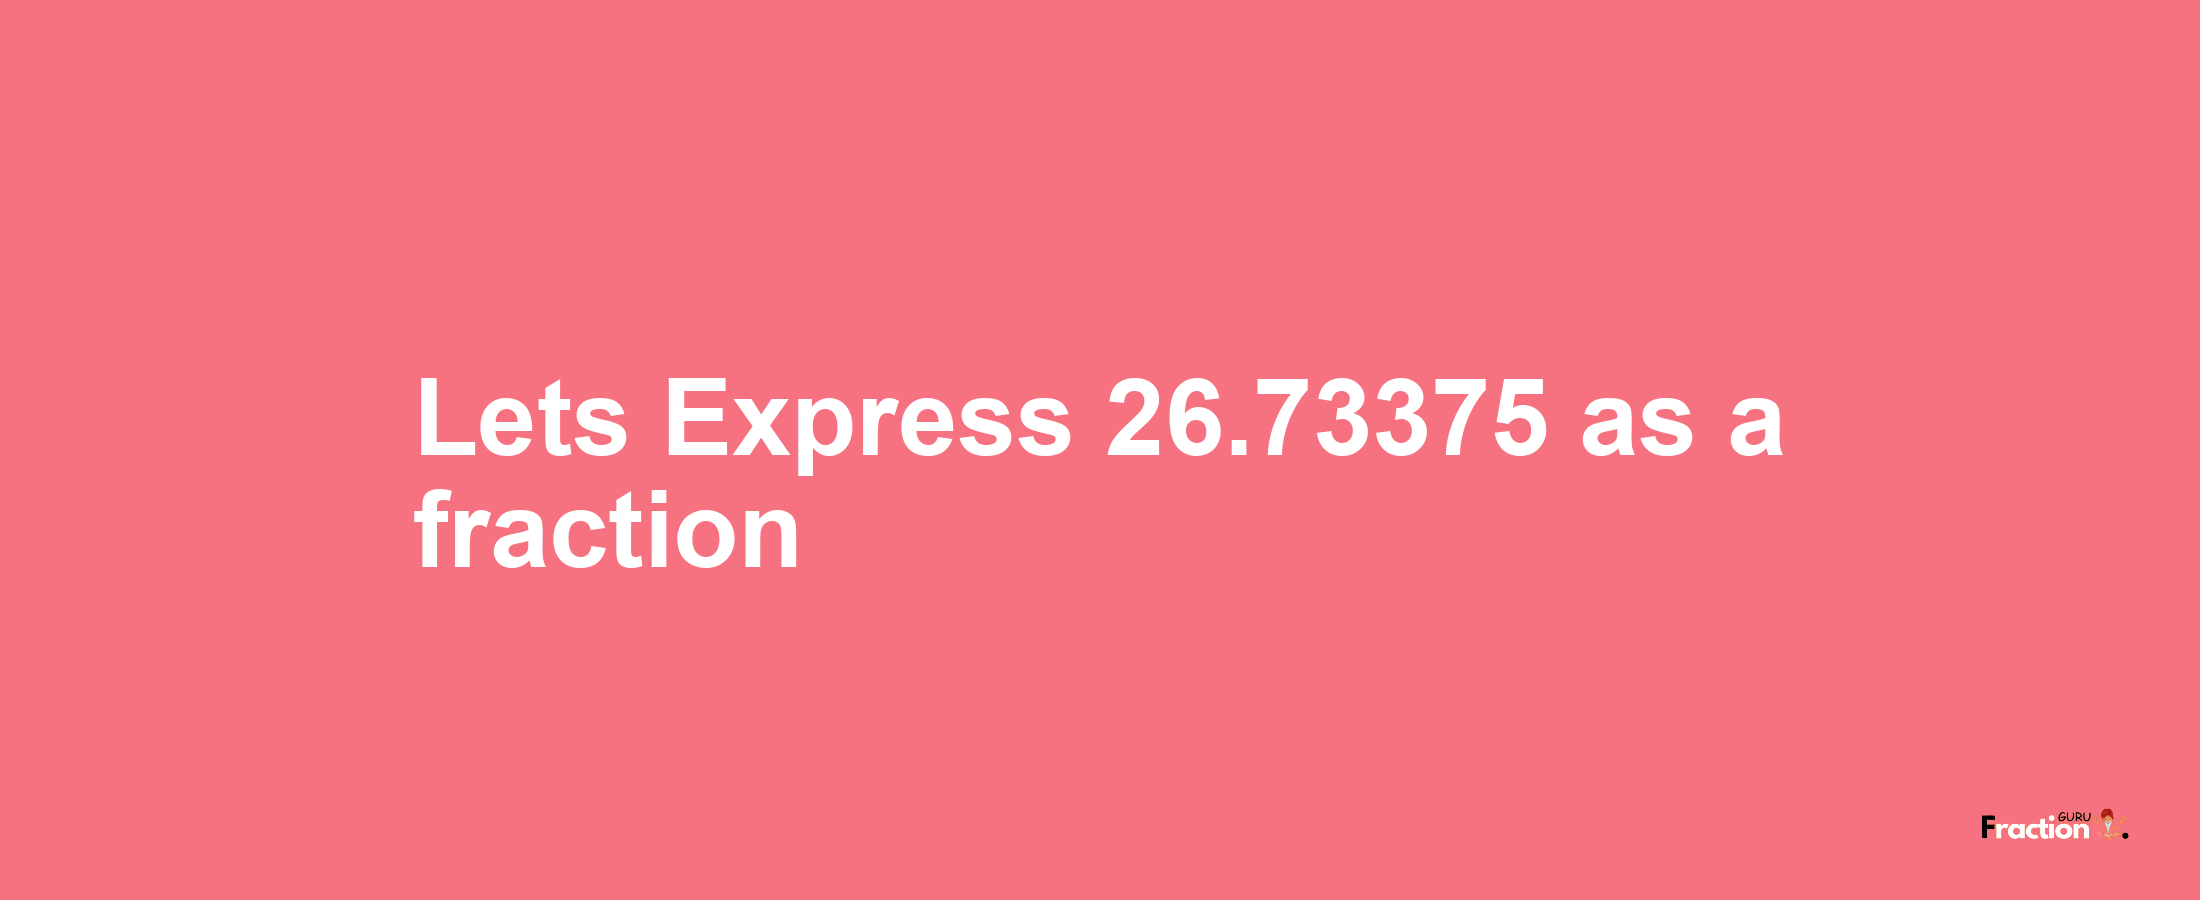 Lets Express 26.73375 as afraction